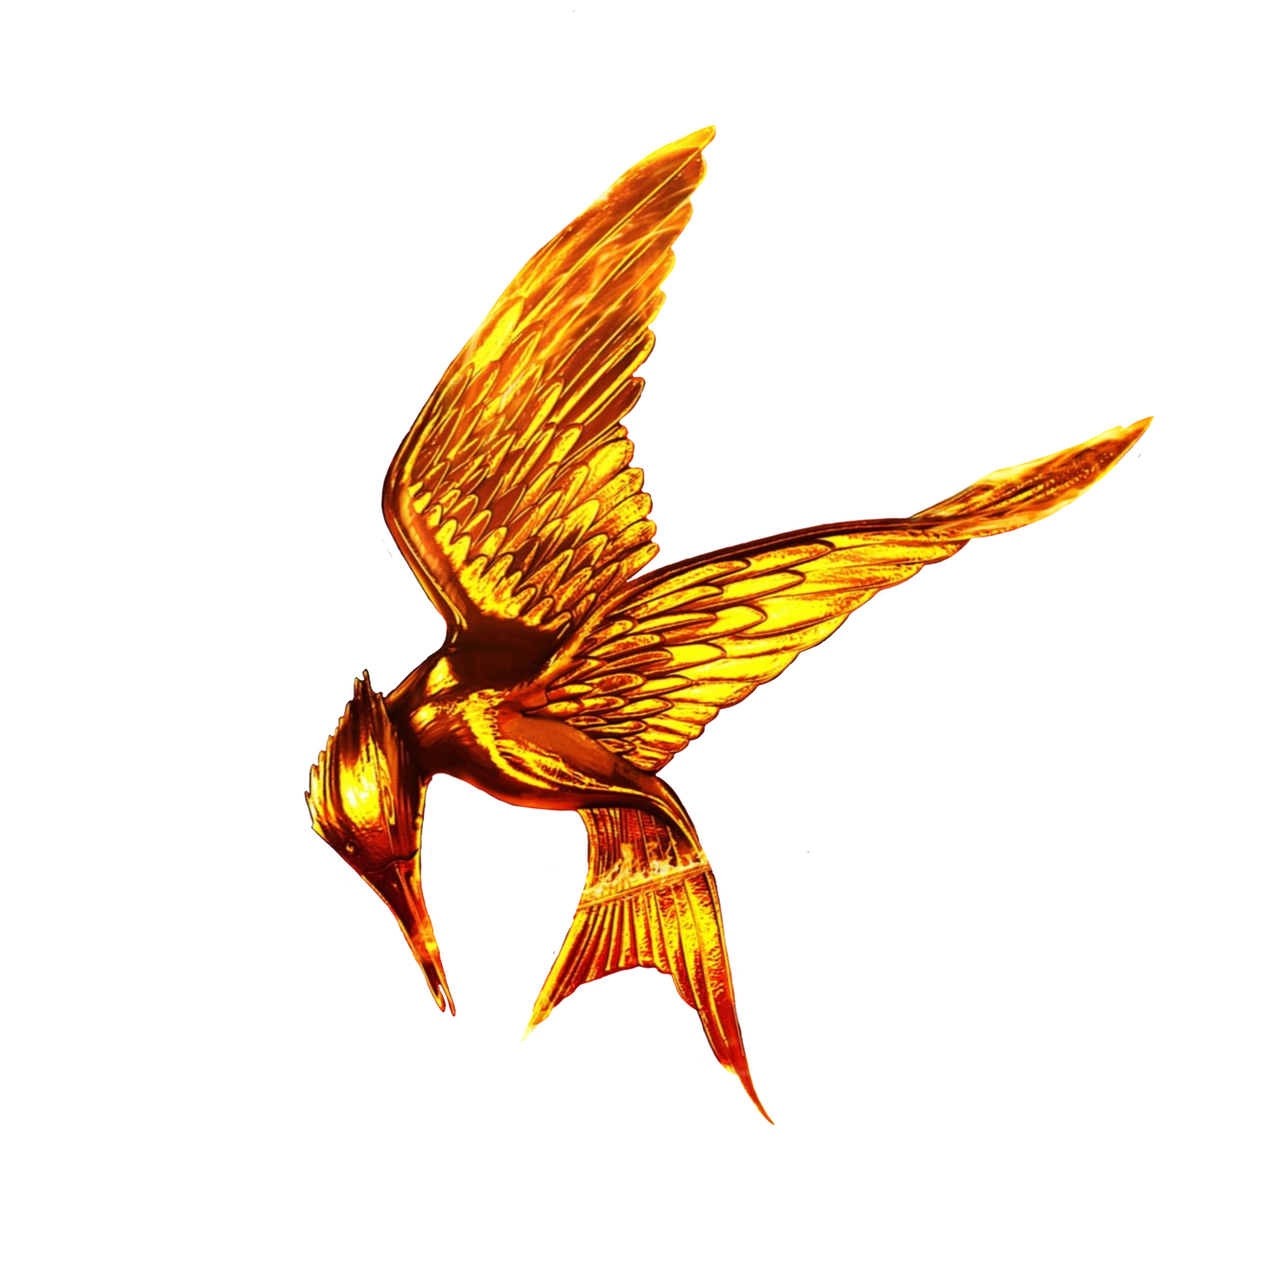 hunger games clip art free - photo #24